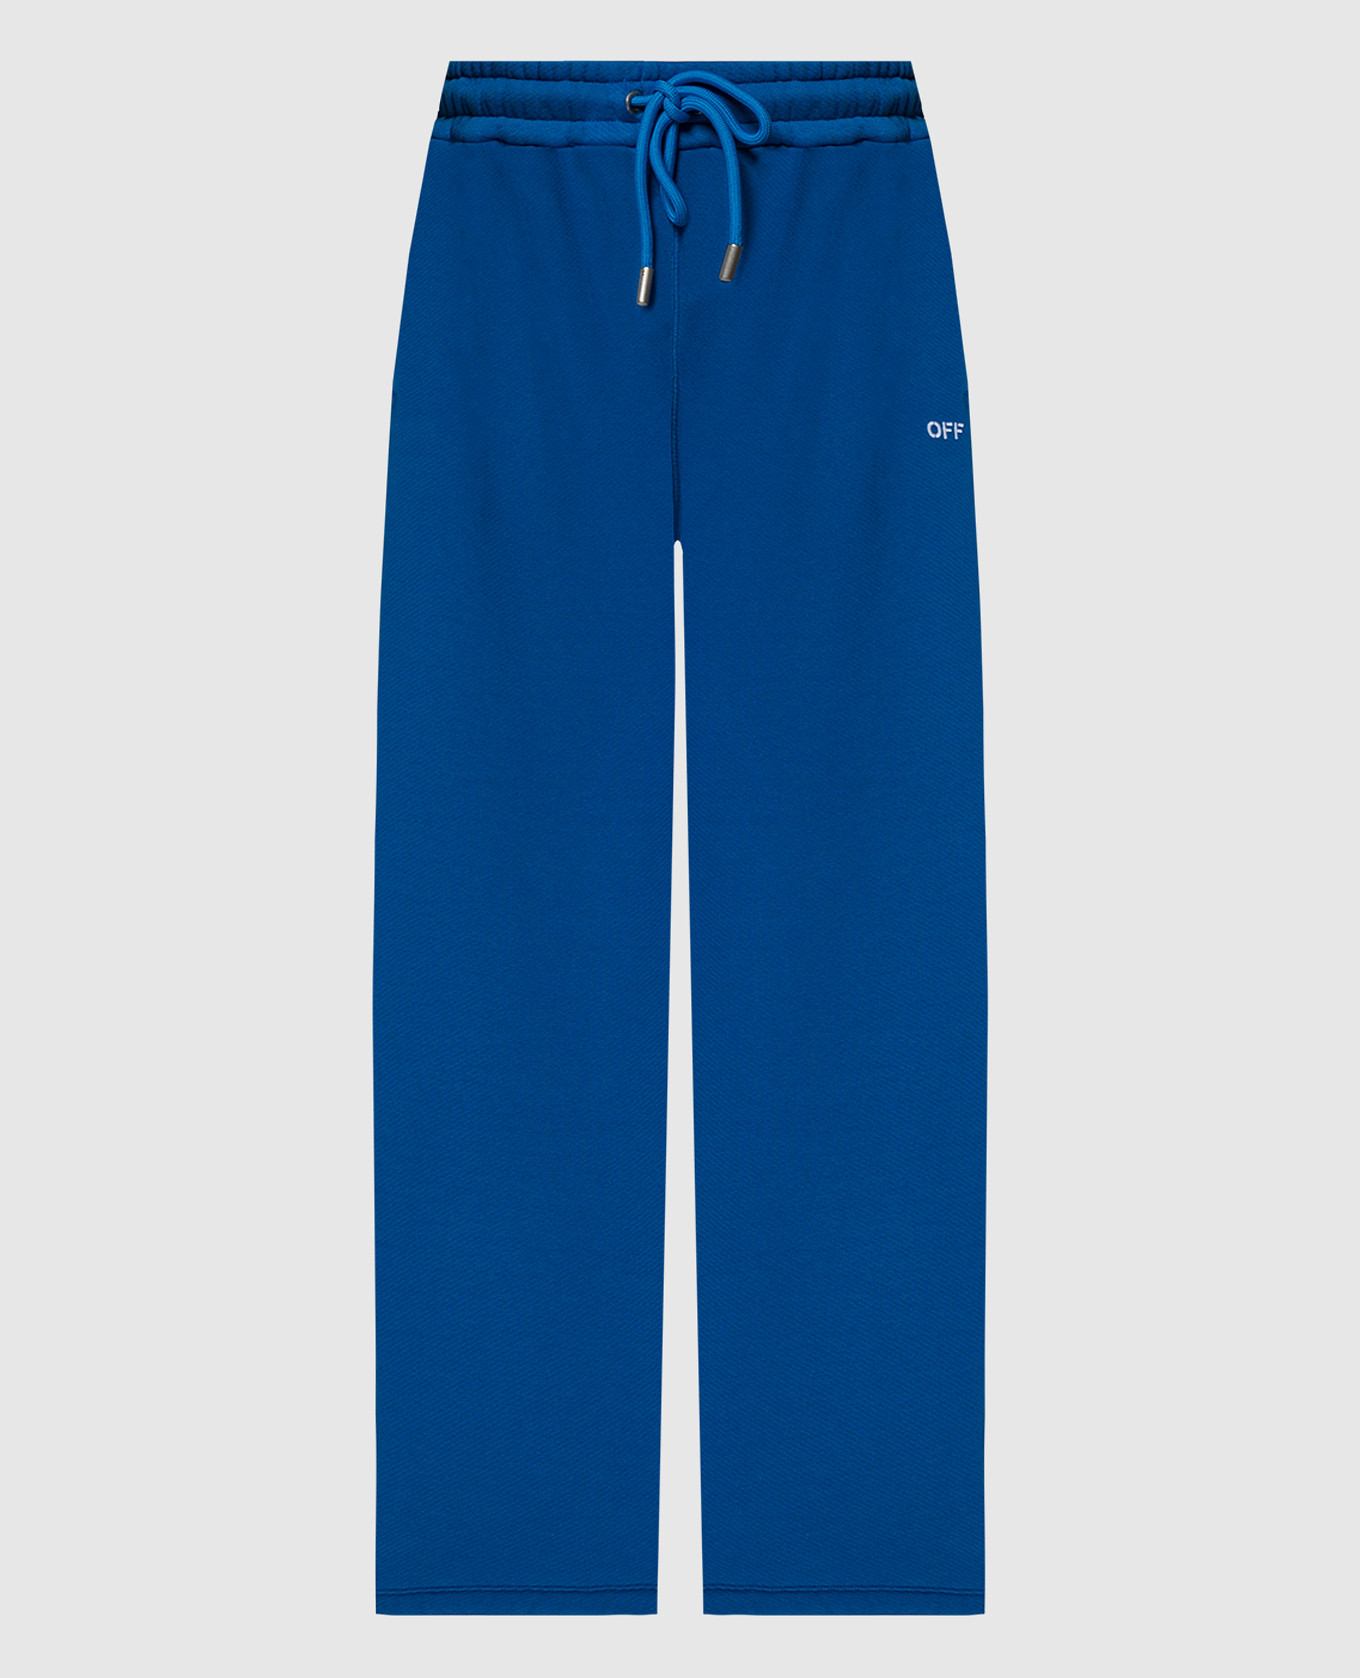 Blue sweatpants with Off embroidery